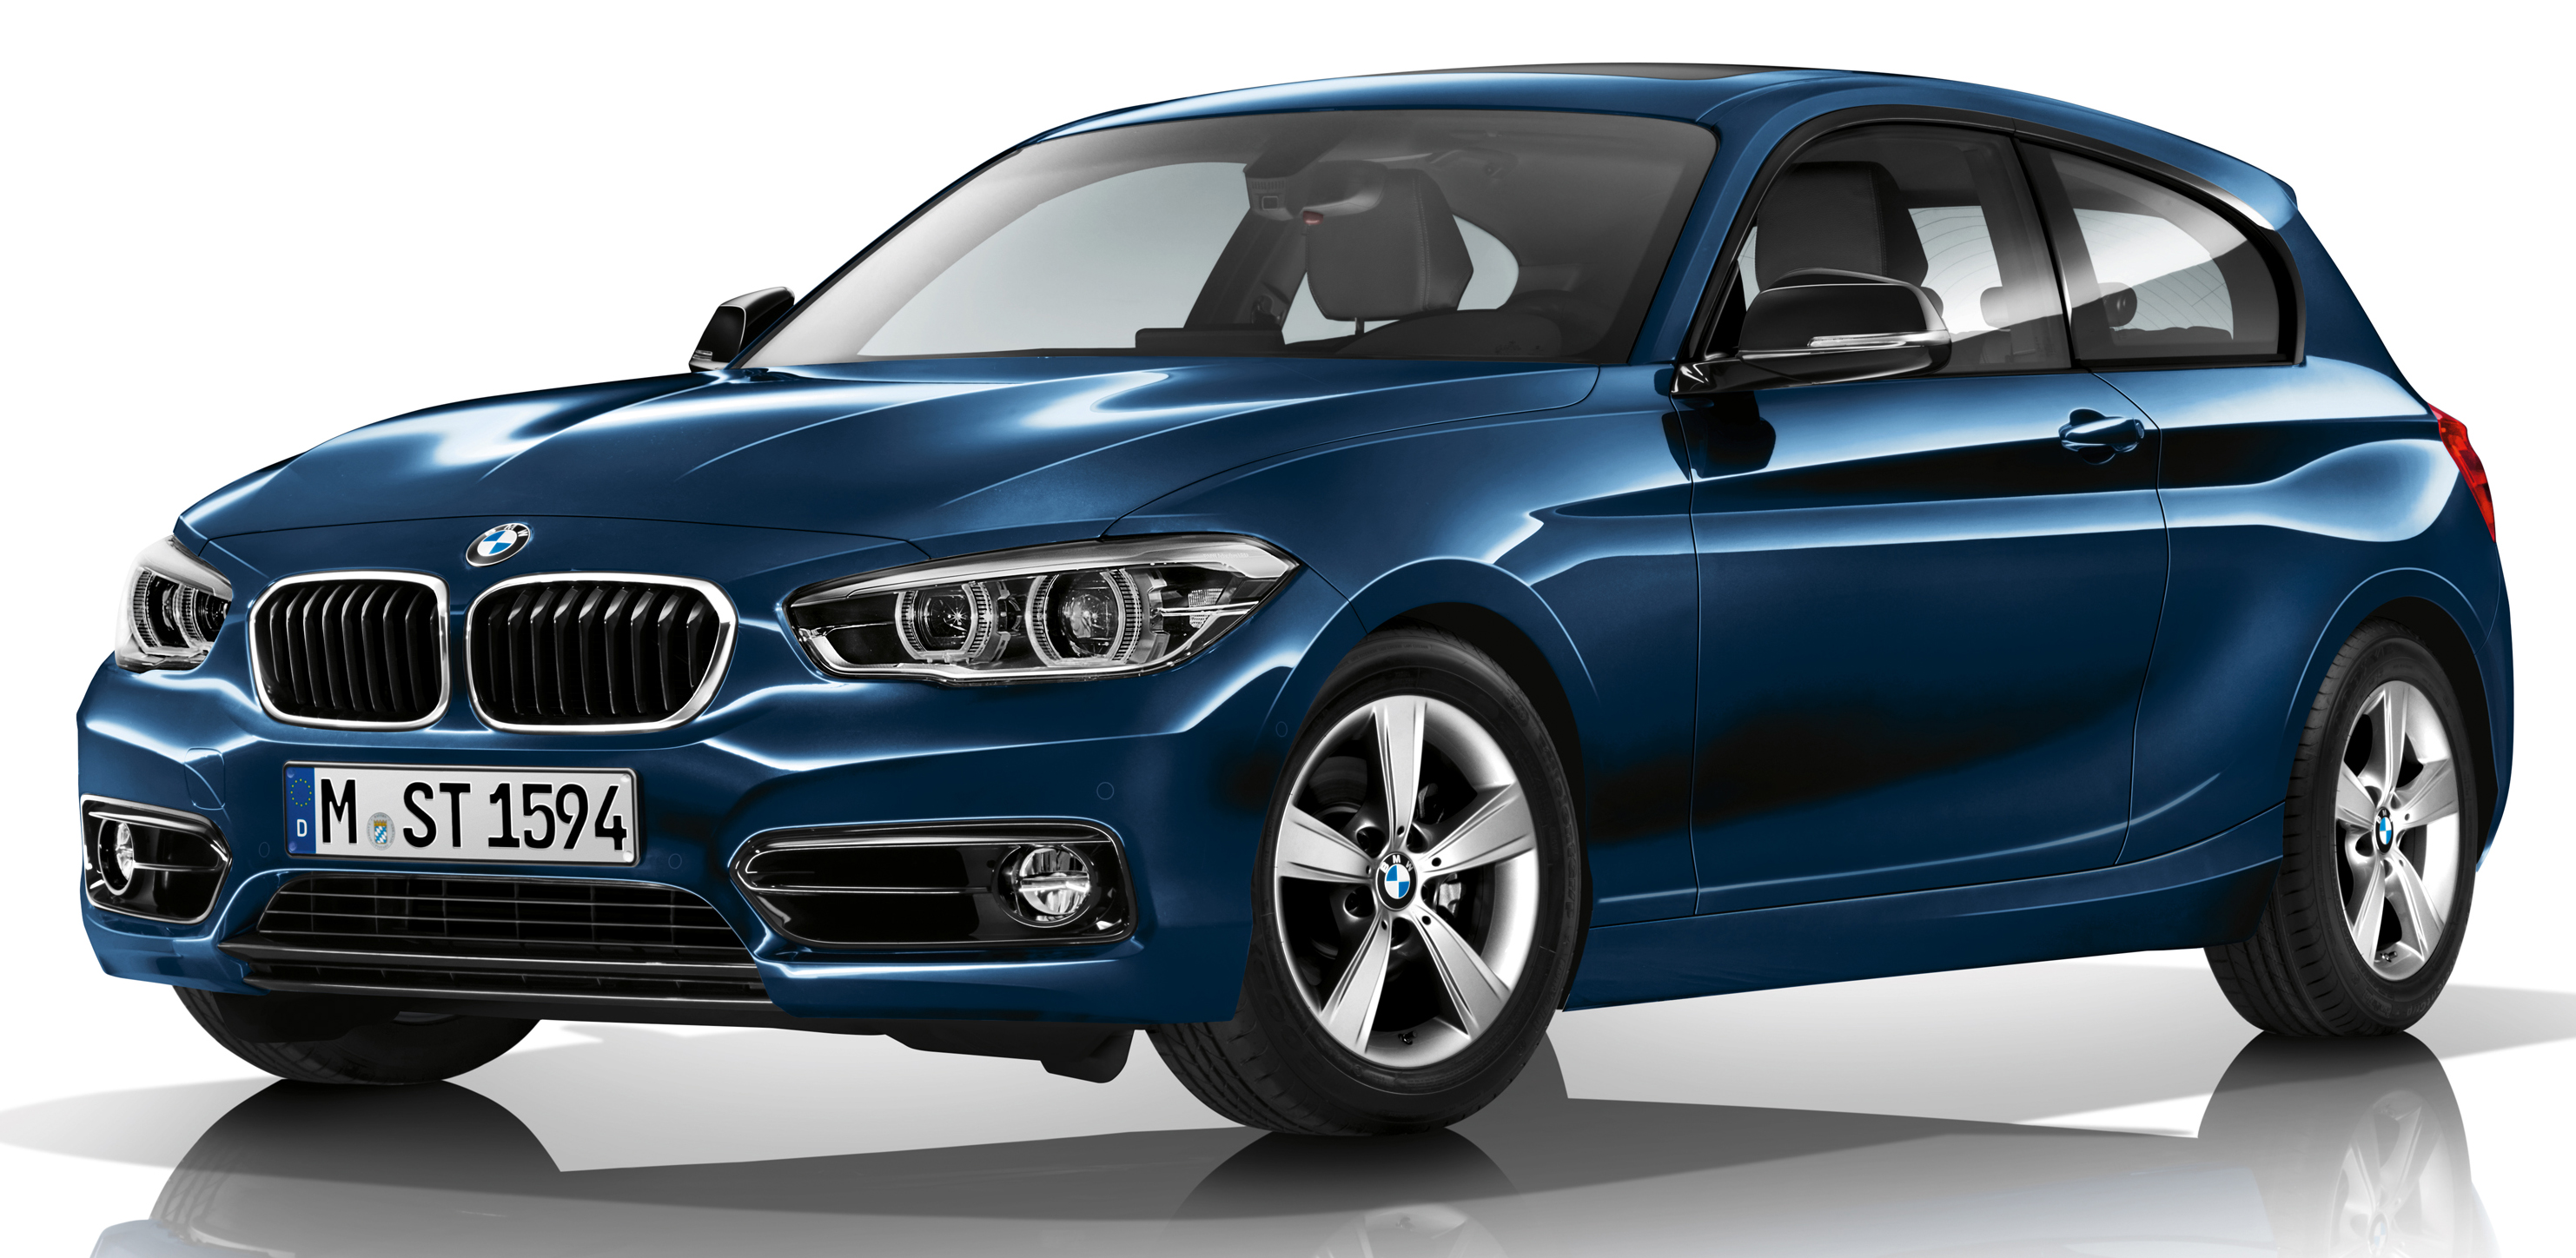 F20 BMW 1 Series facelift unveiled new face and rear end